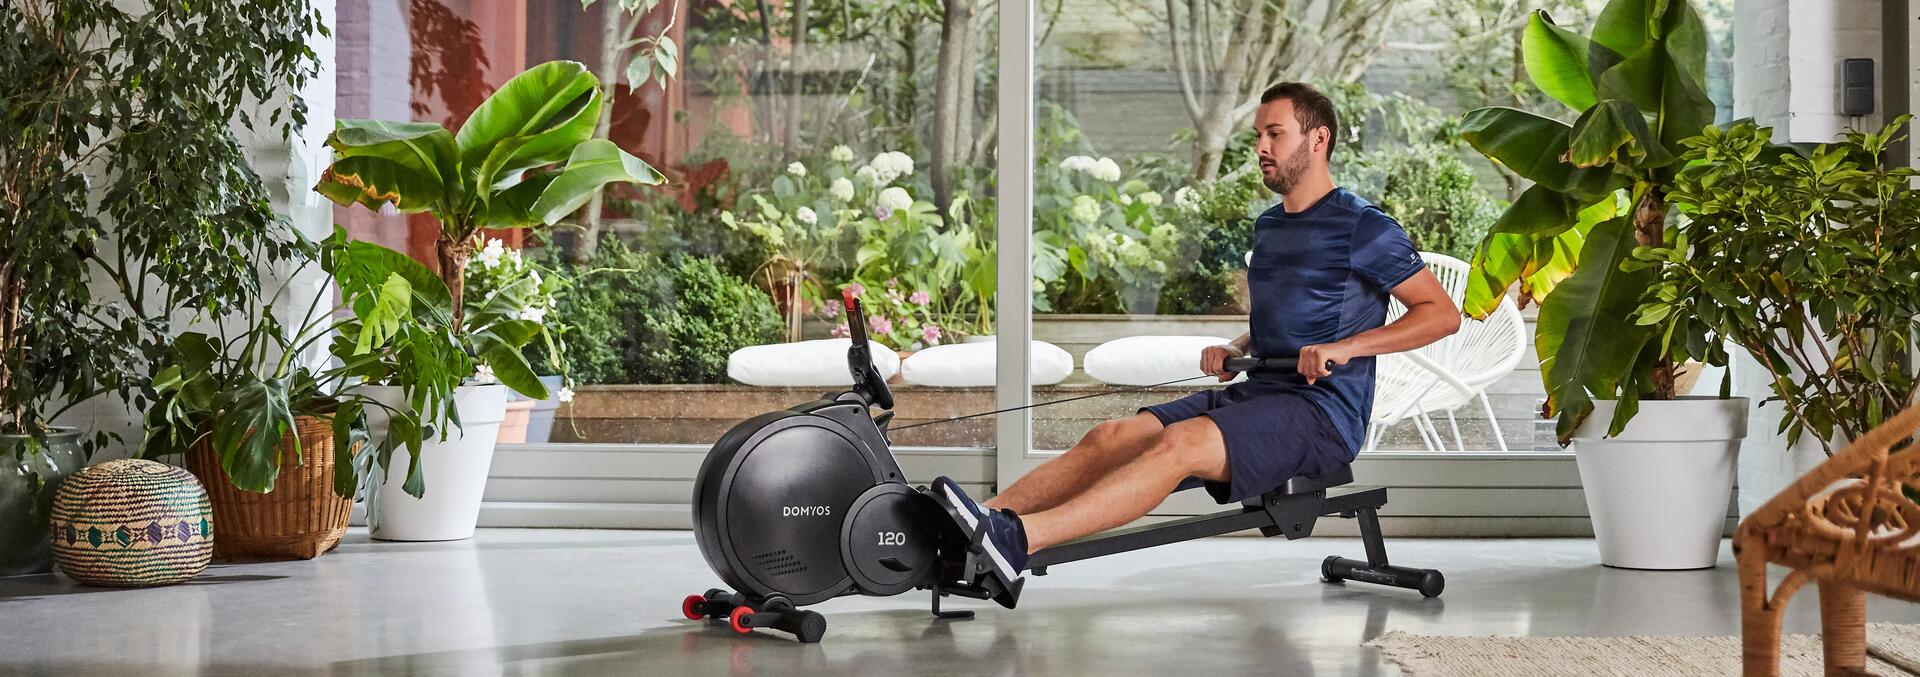 How To Use The Rowing Machine Effectively - Rowing Machine